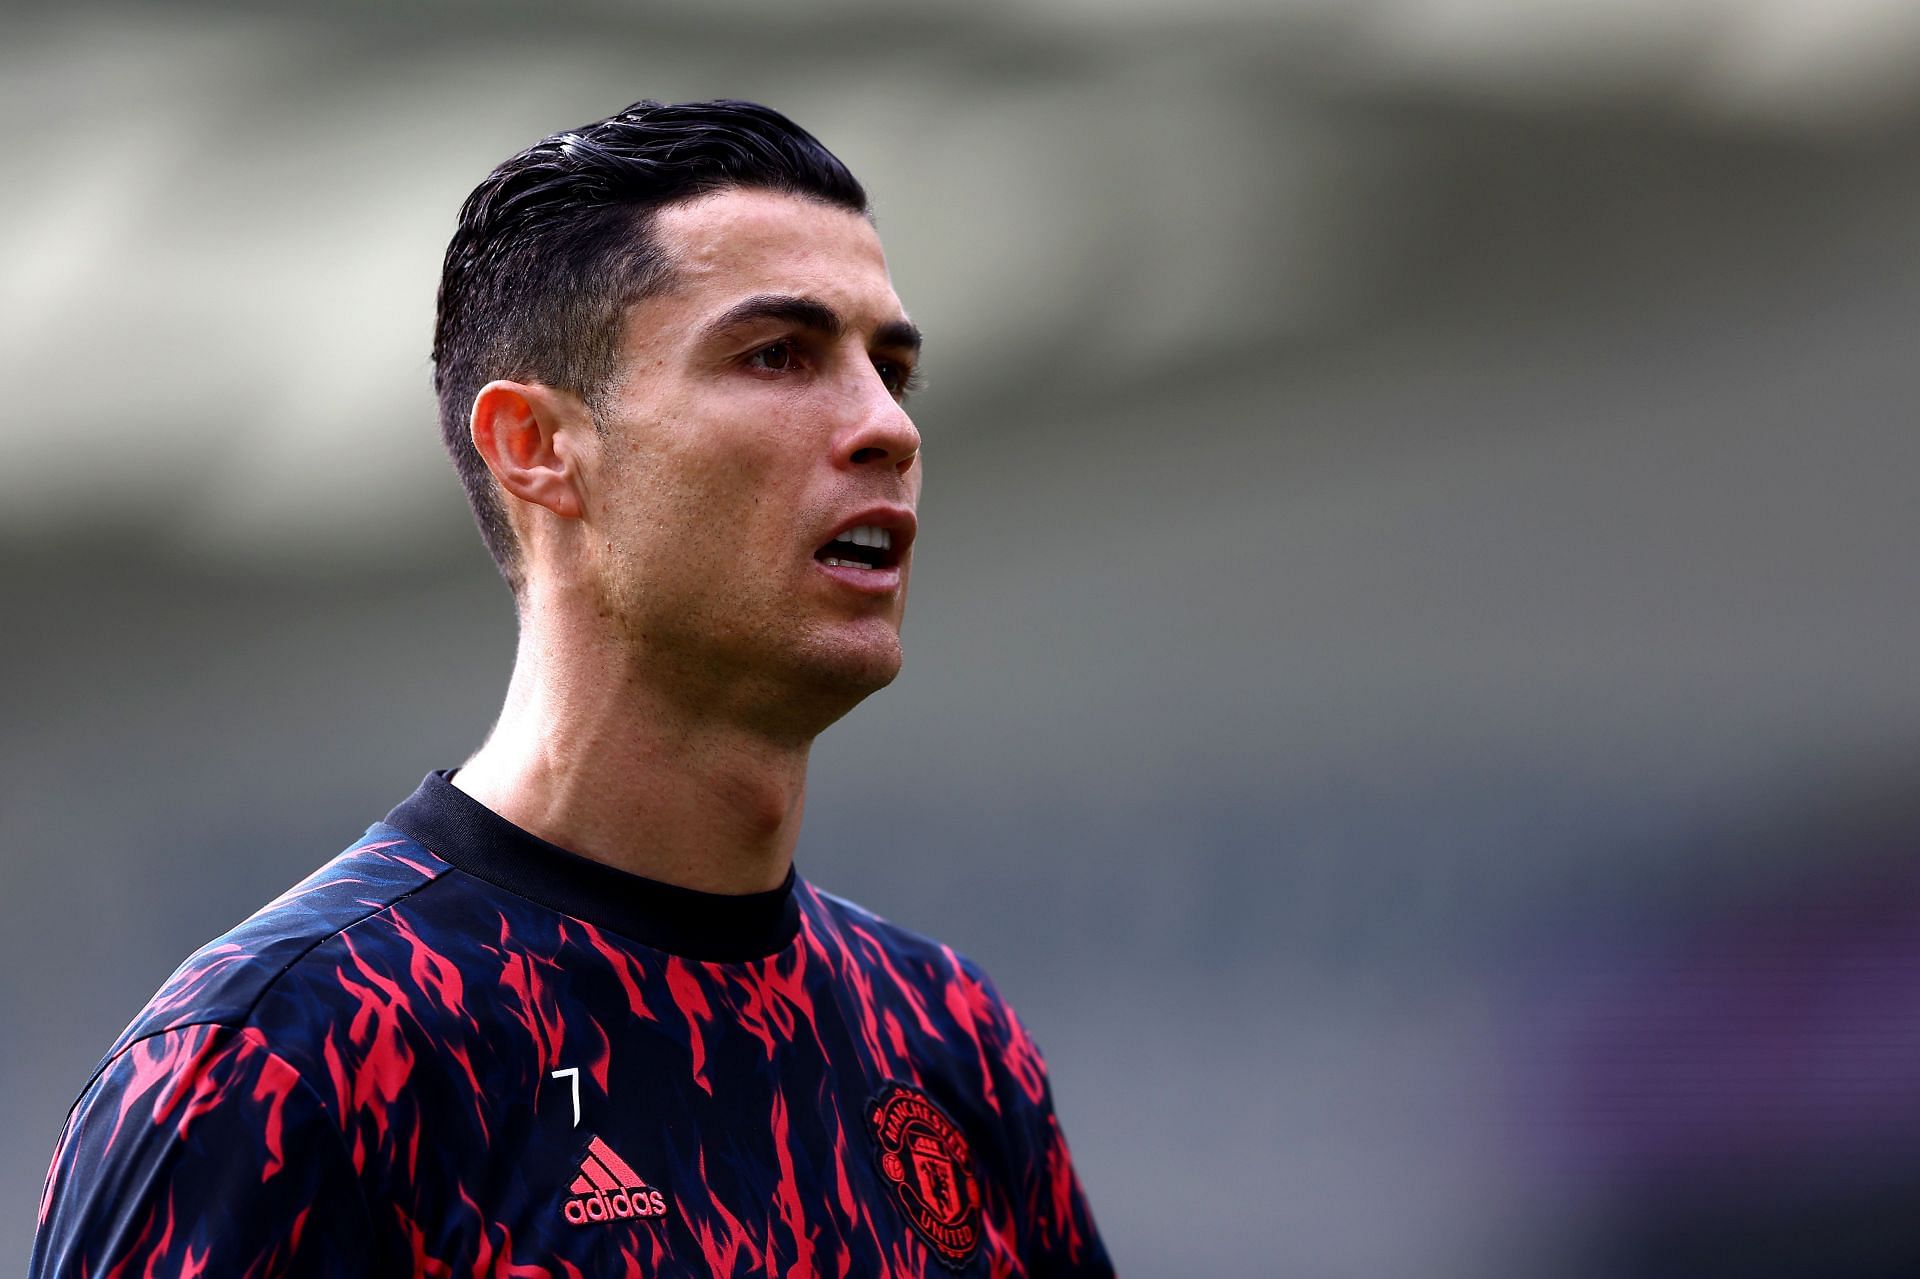 Cristiano Ronaldo has endured a difficult time since returning to Old Trafford last summer.